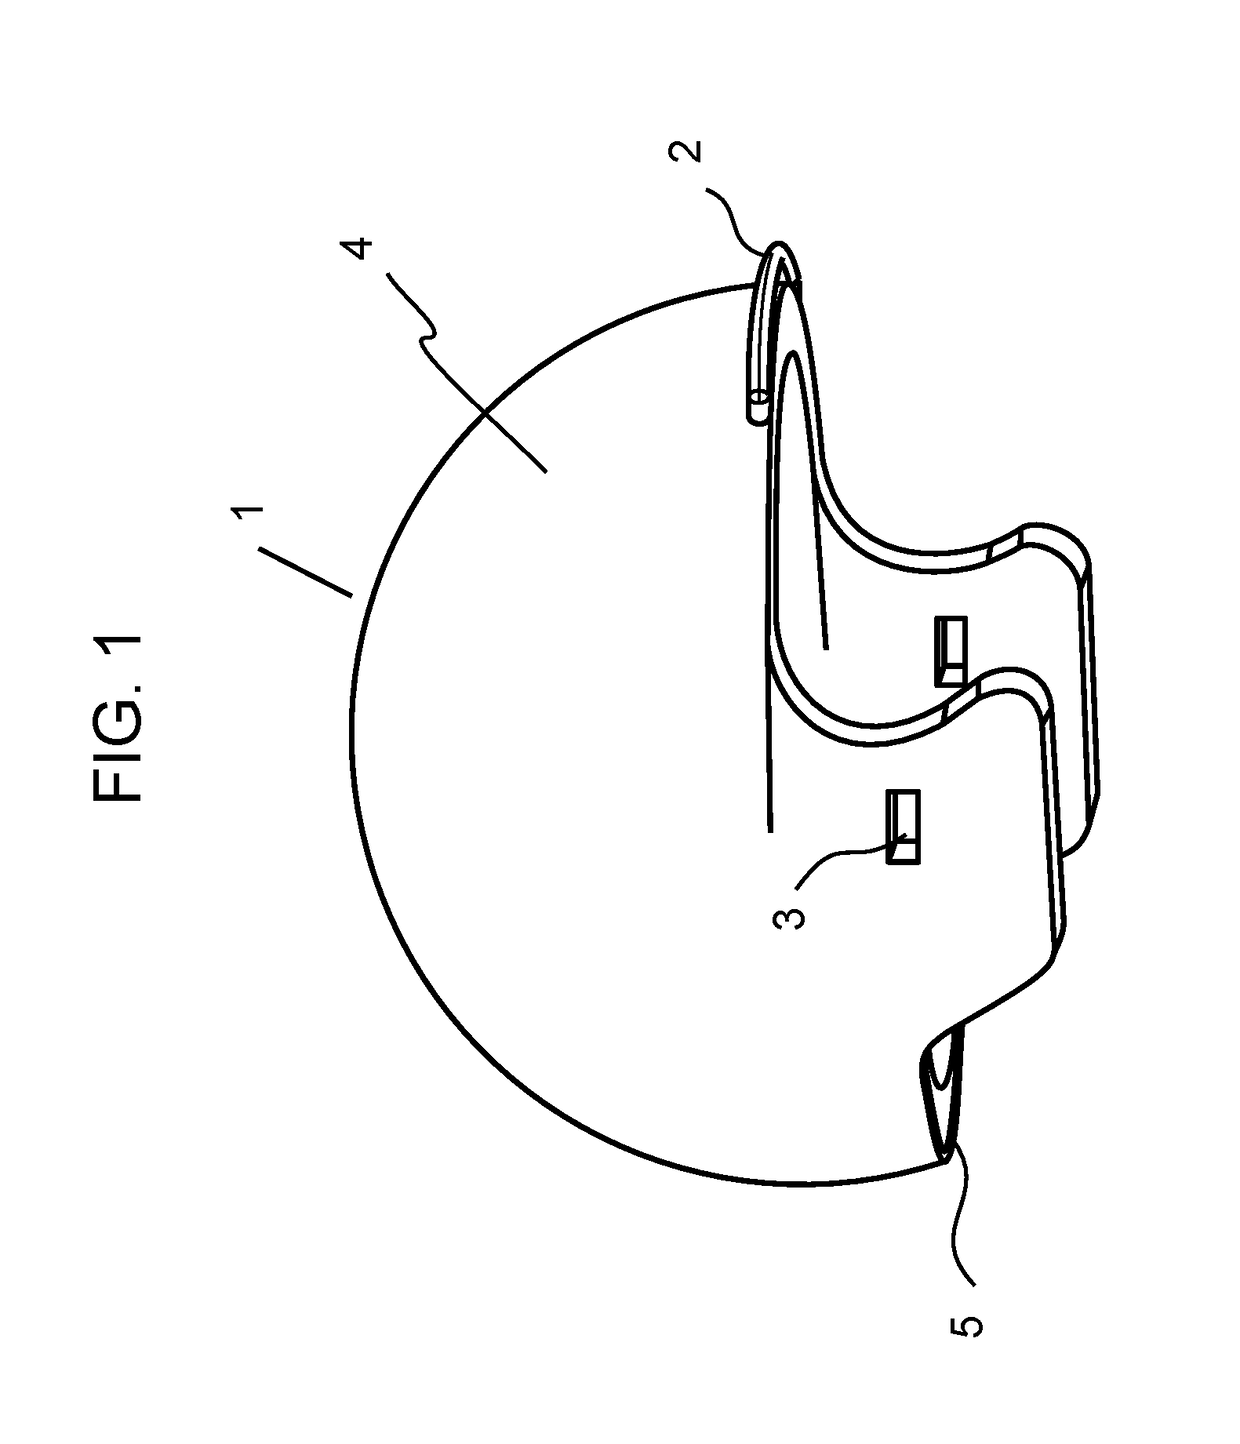 Method and apparatus for preventing concussions